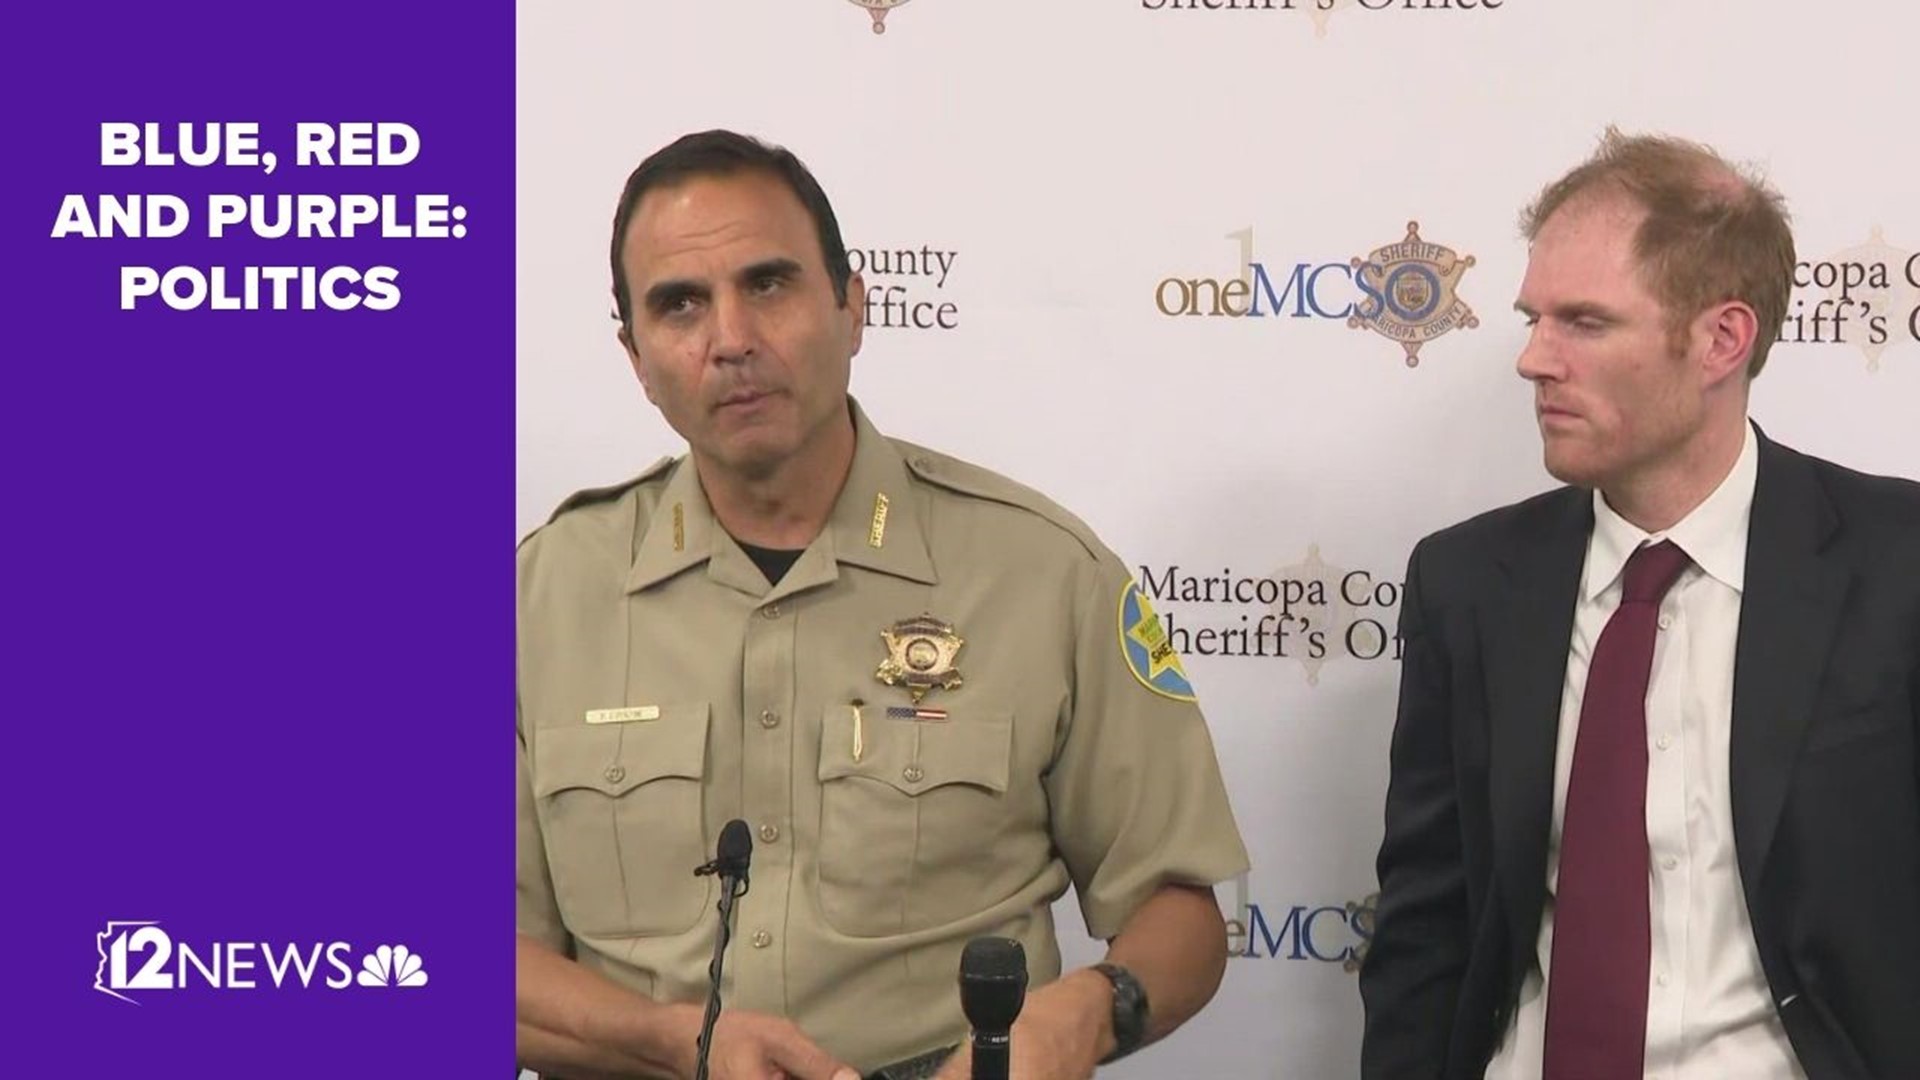 Officials detailed their plan to ensure public safety and protect the electoral process during the primary and general elections in Maricopa County.